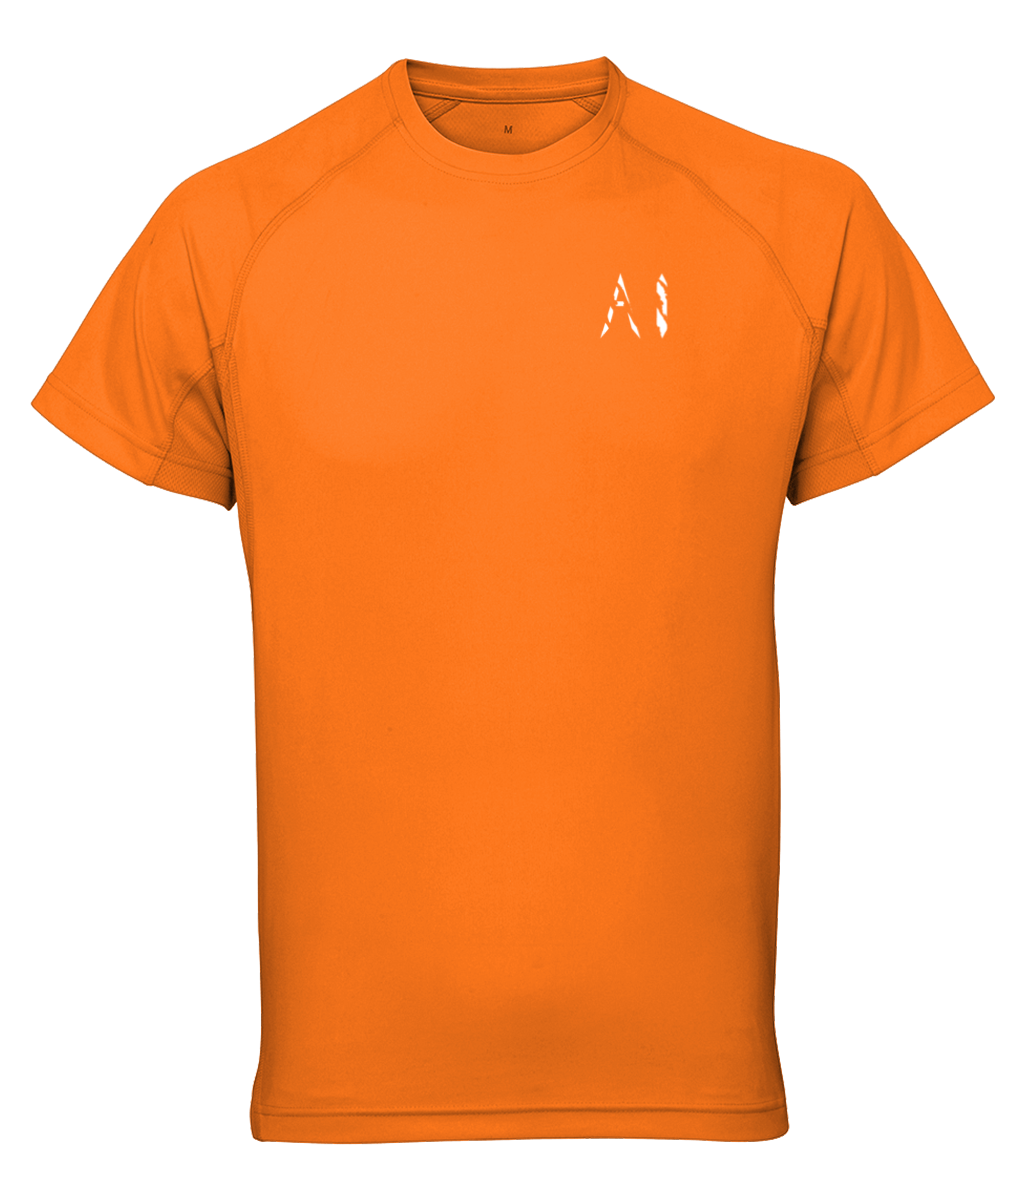 Mens orange Athletic Performance Top with White AI logo on the left chest